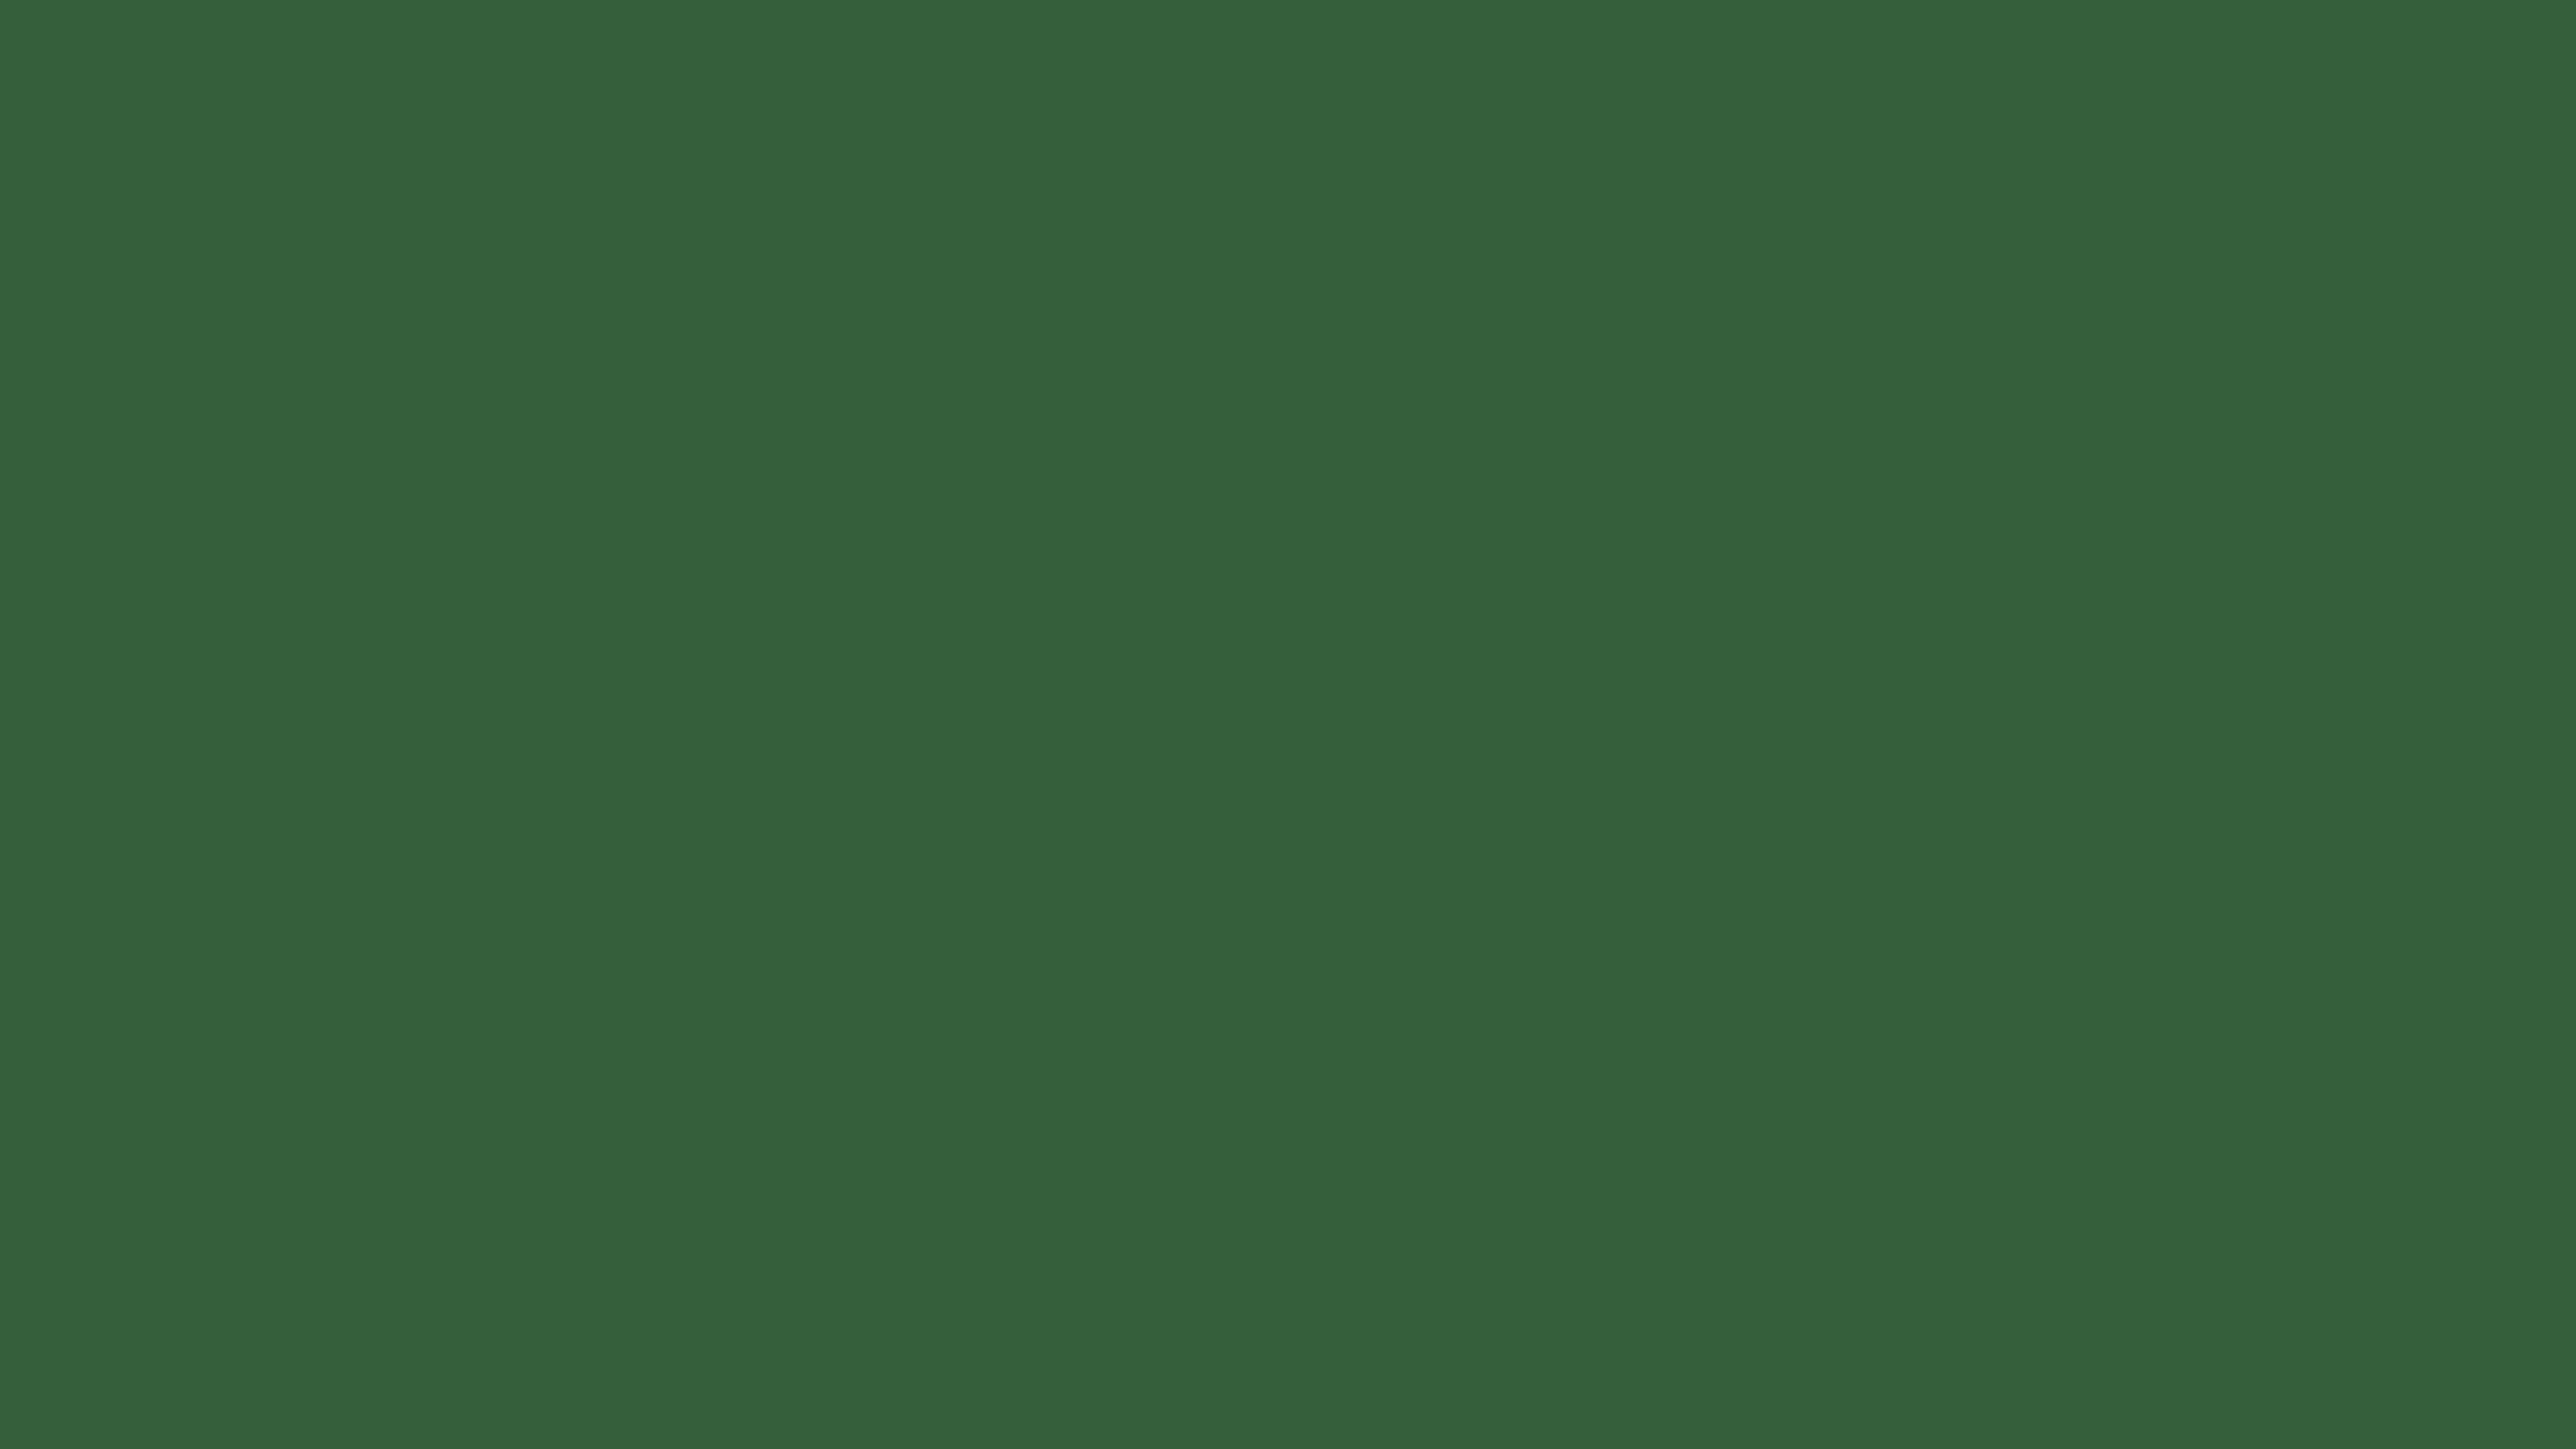 7680x4320 Deep Moss Green Solid Color Background